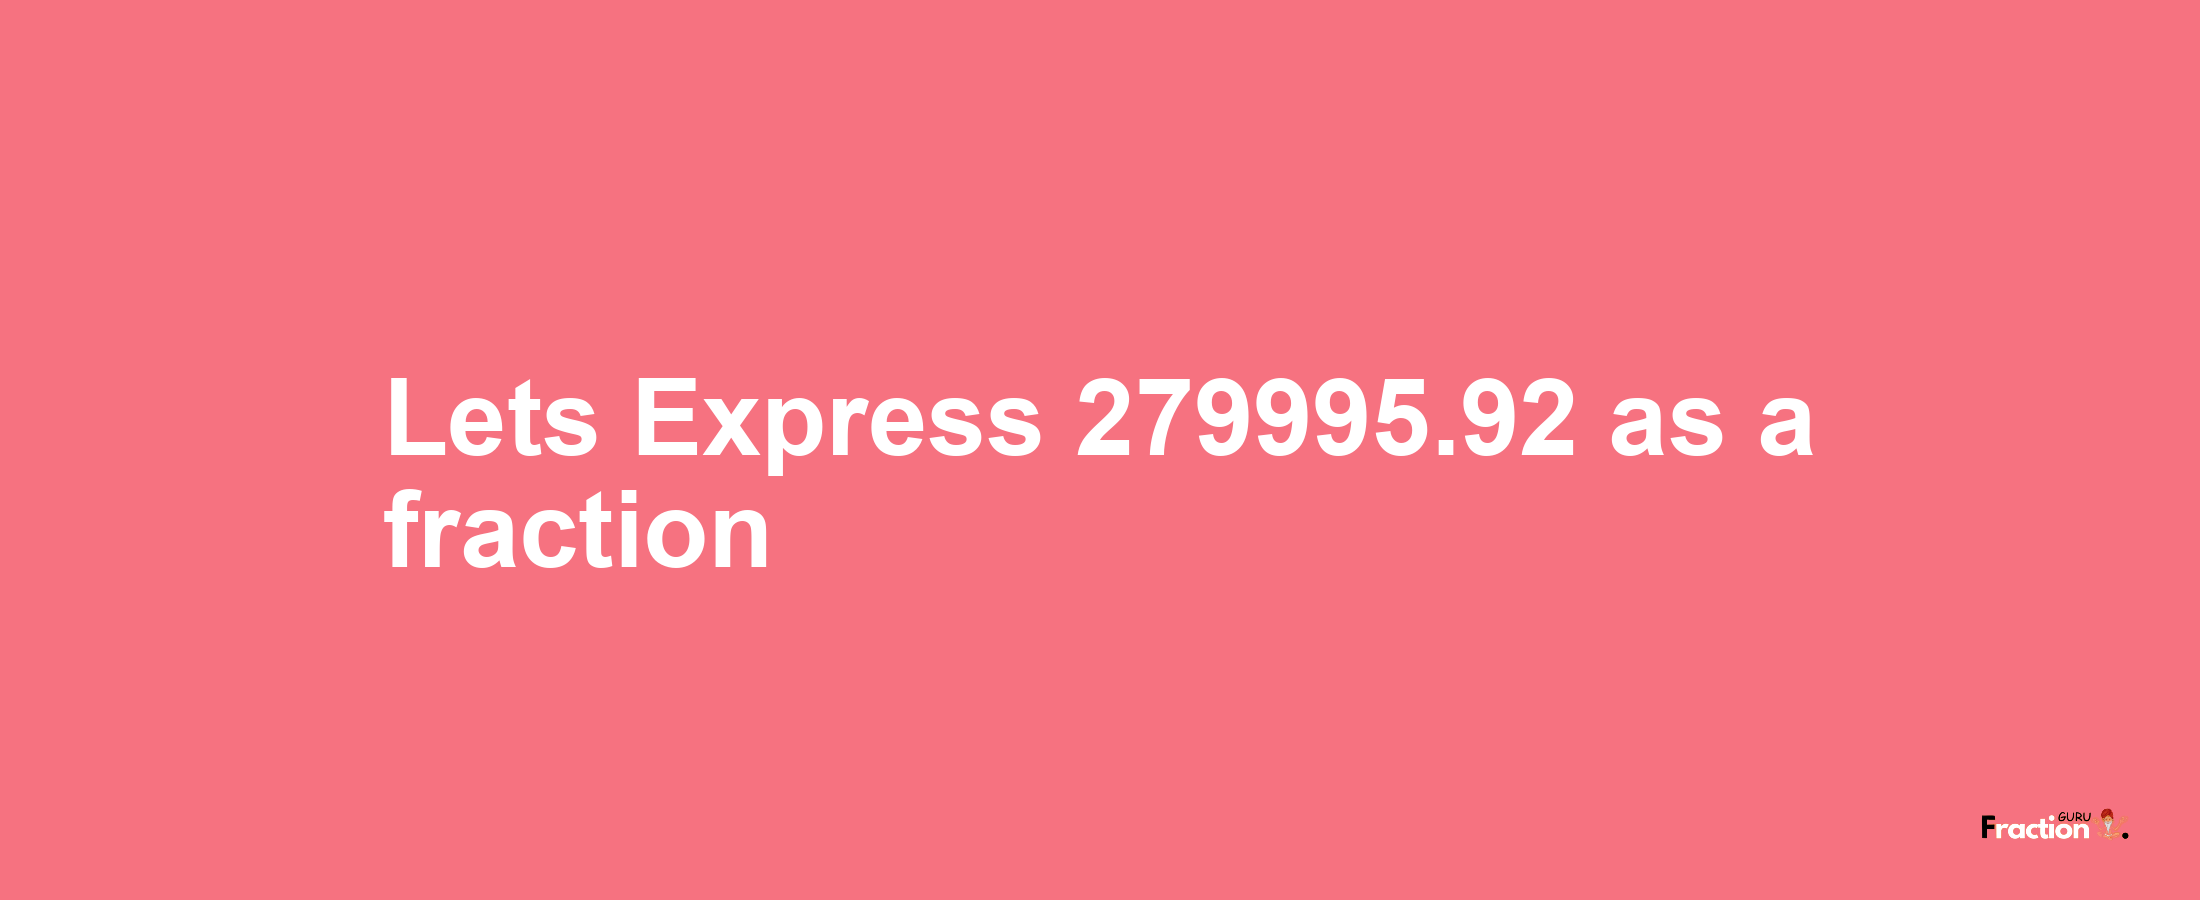 Lets Express 279995.92 as afraction